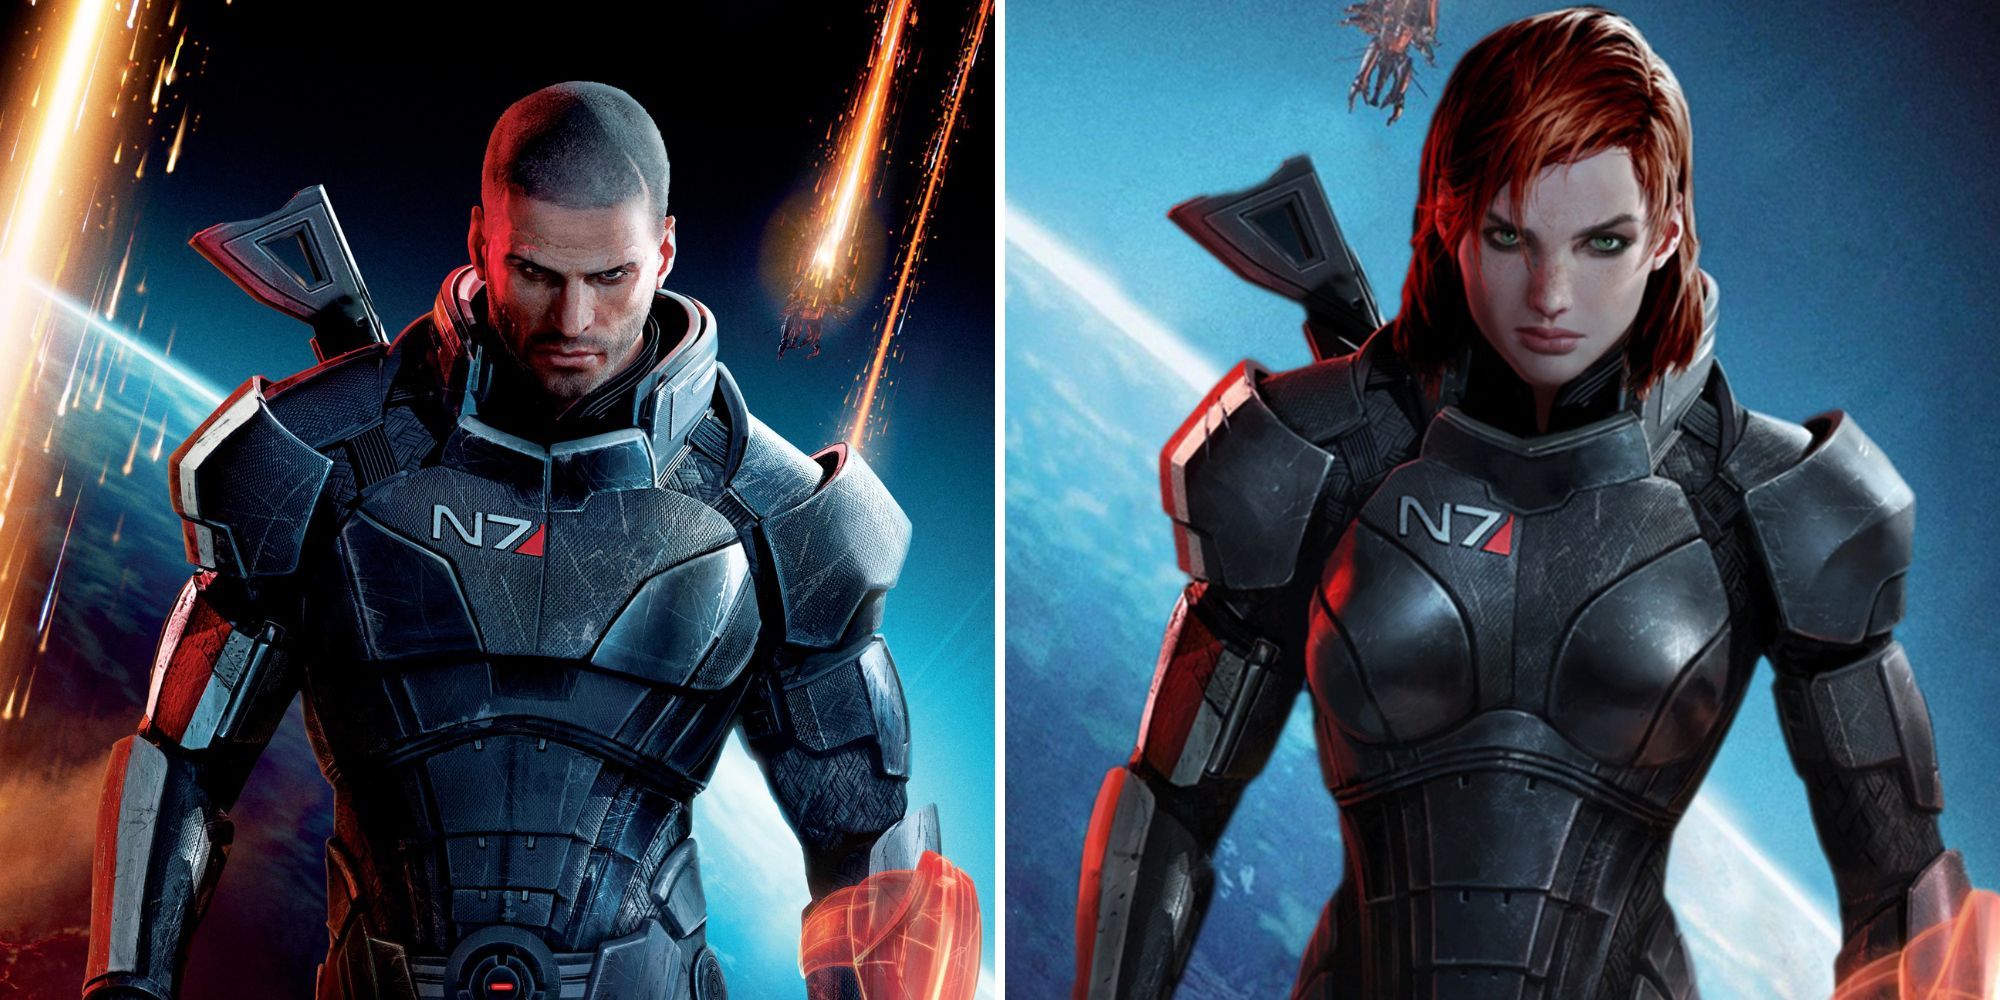 Both versions of Commander Shepard staring at the viewer (Mass Effect franchise)